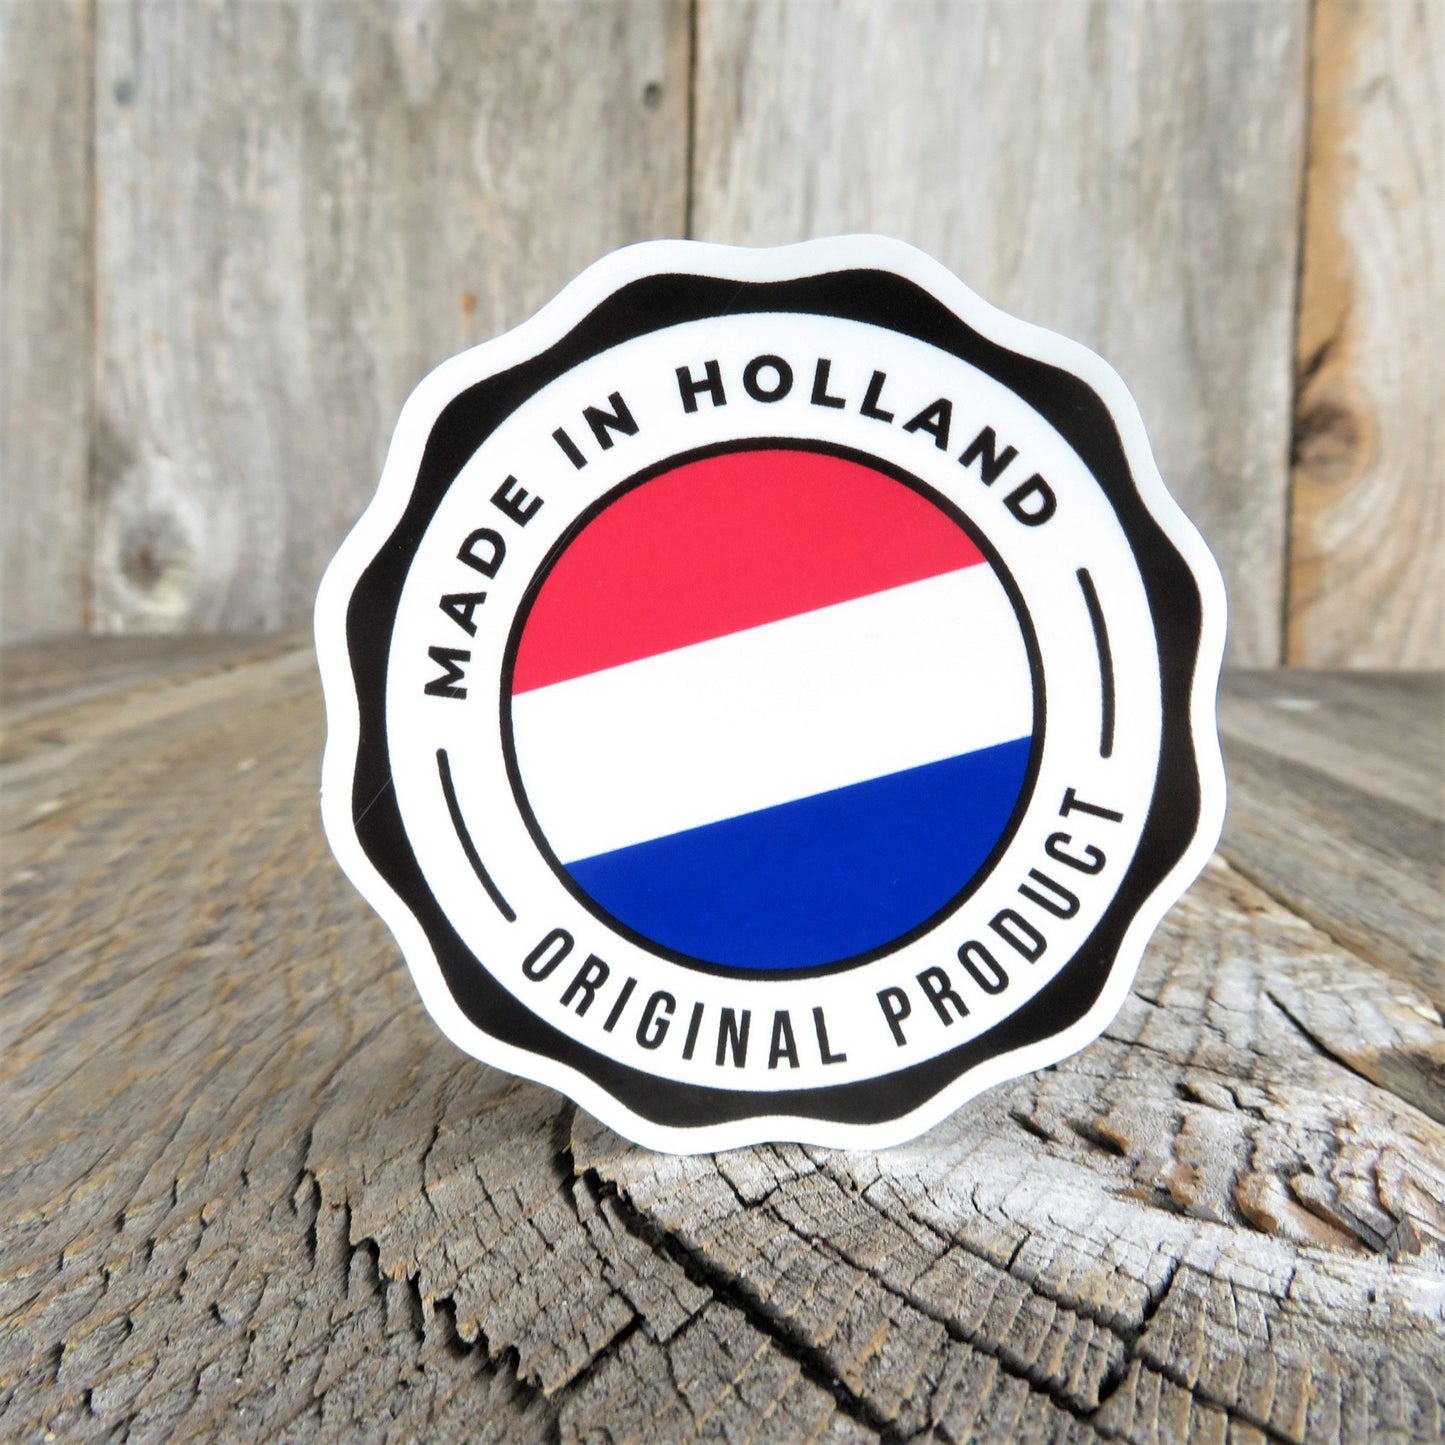 Made in Holland Sticker Original Product Born in Holland Red White Blue Flag Netherlands Water Bottle